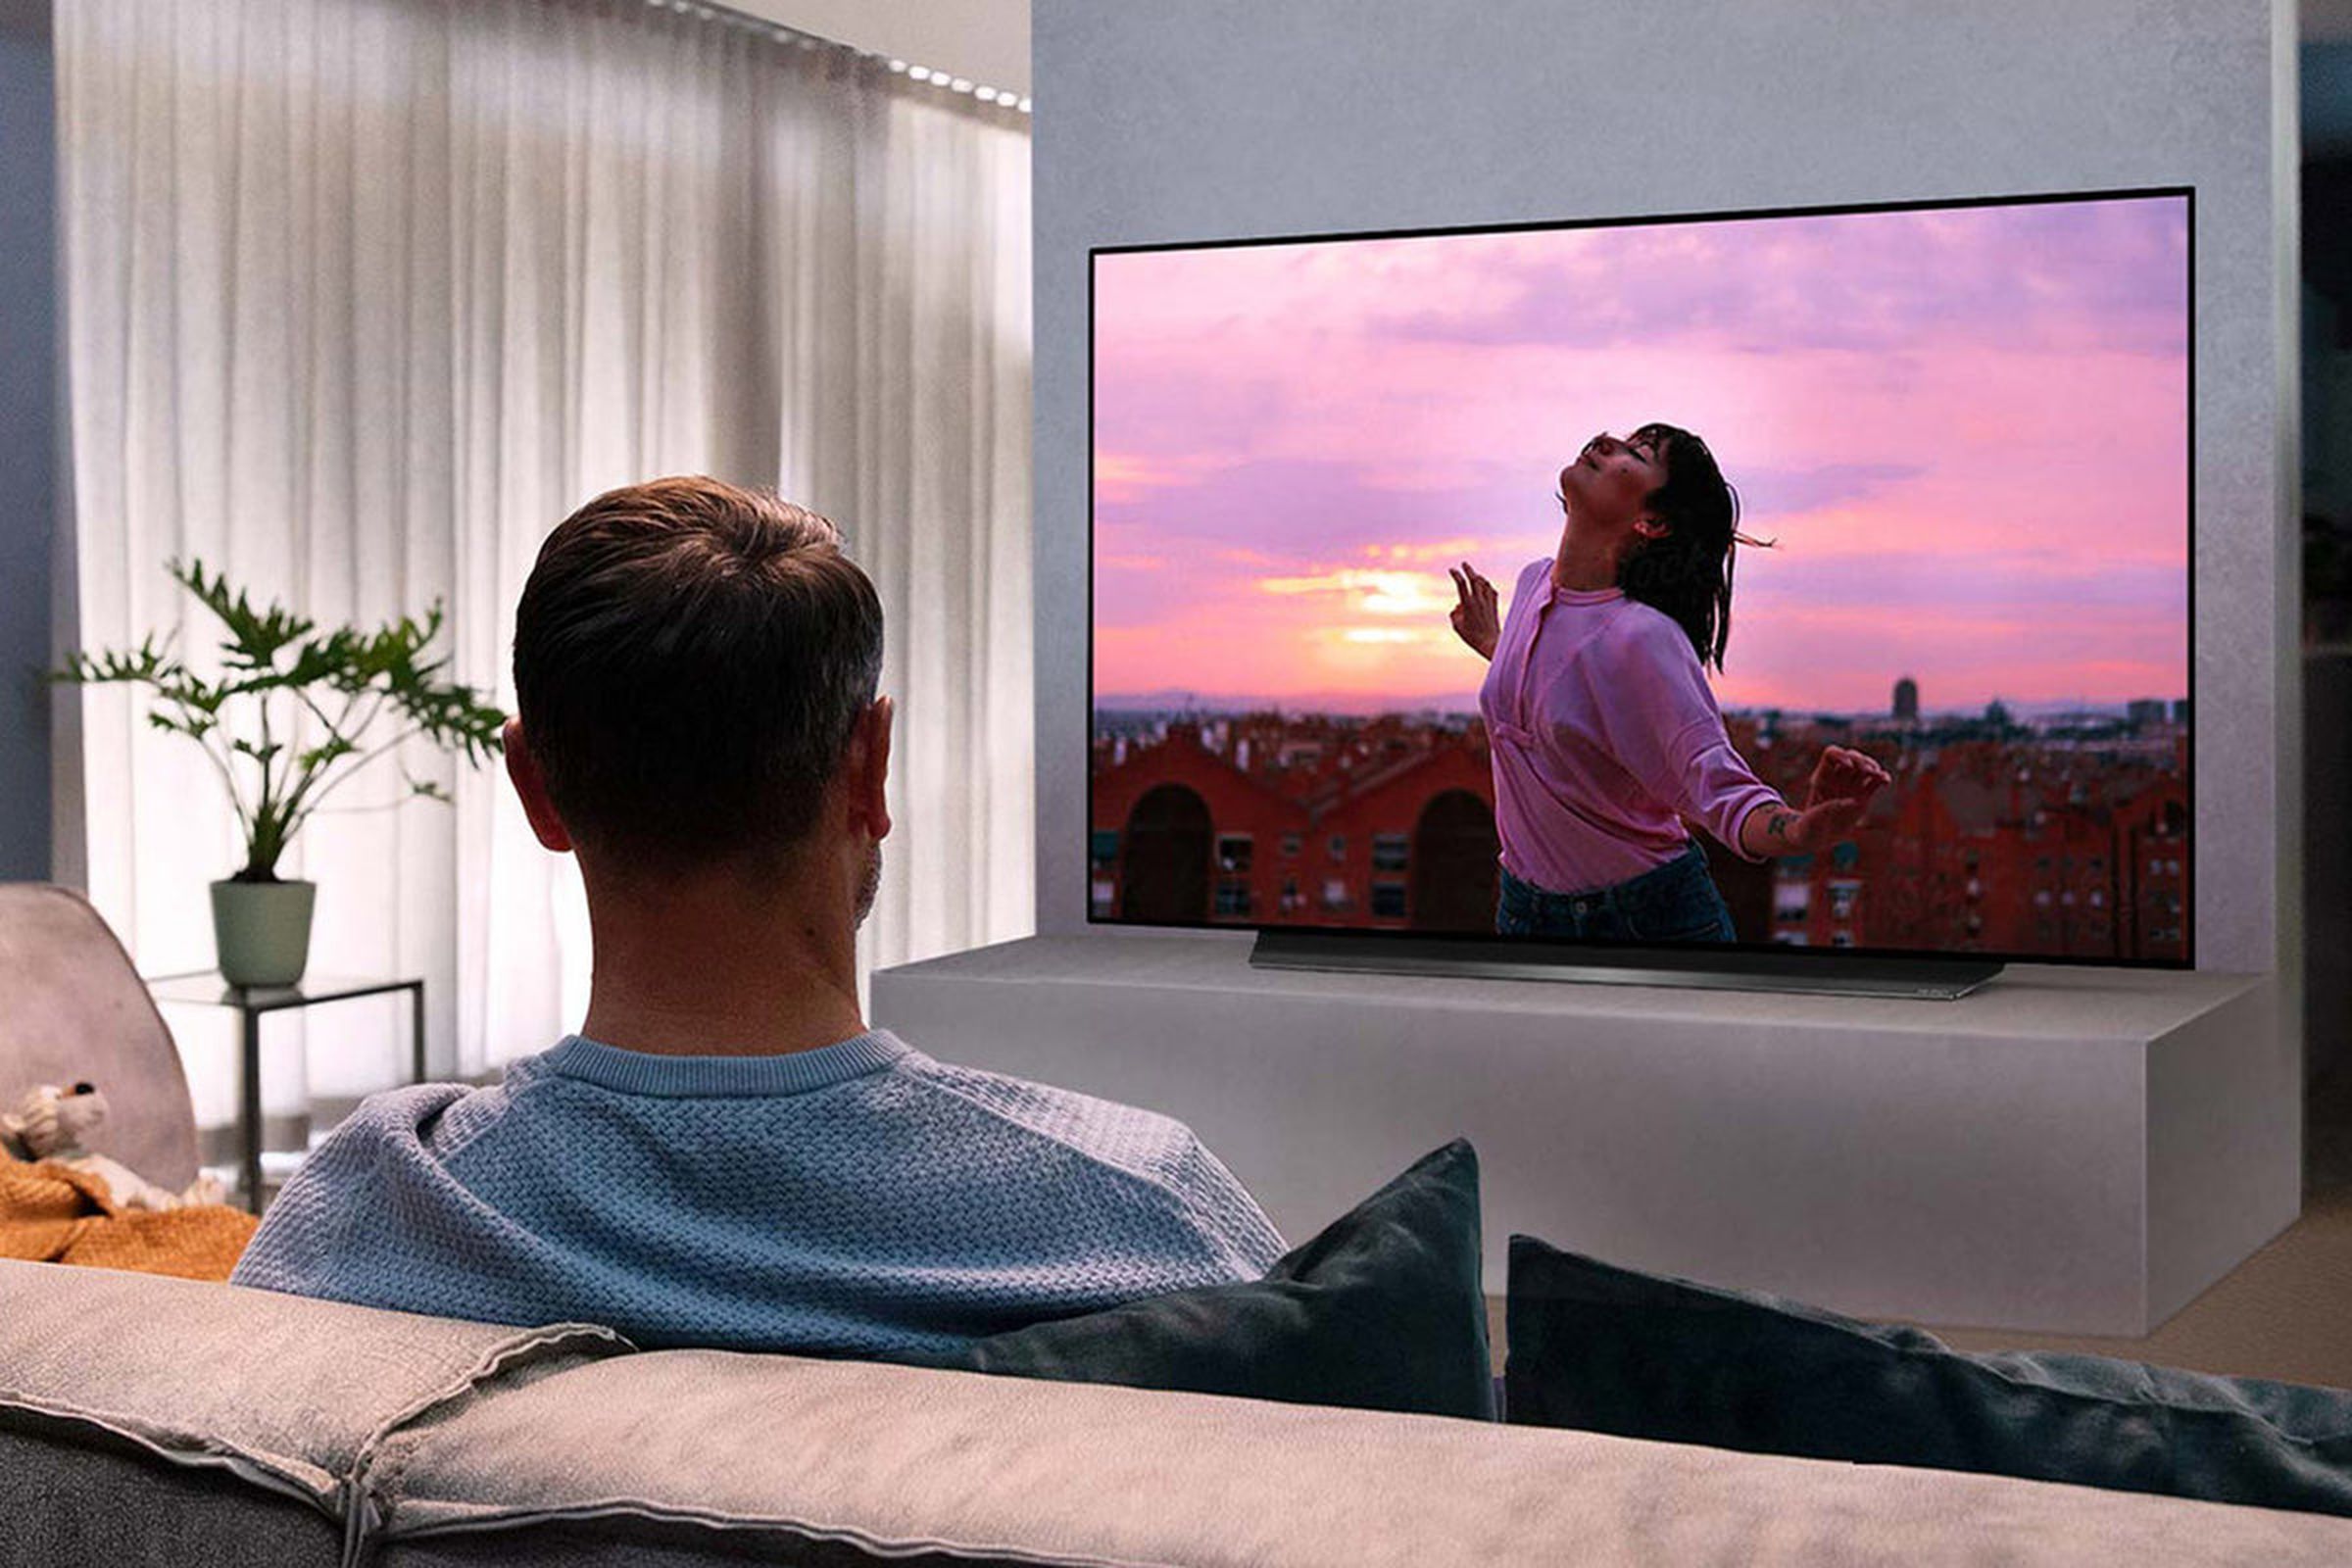 LG’s CX series of OLED TVs offer stunning black levels and plenty of smart features.